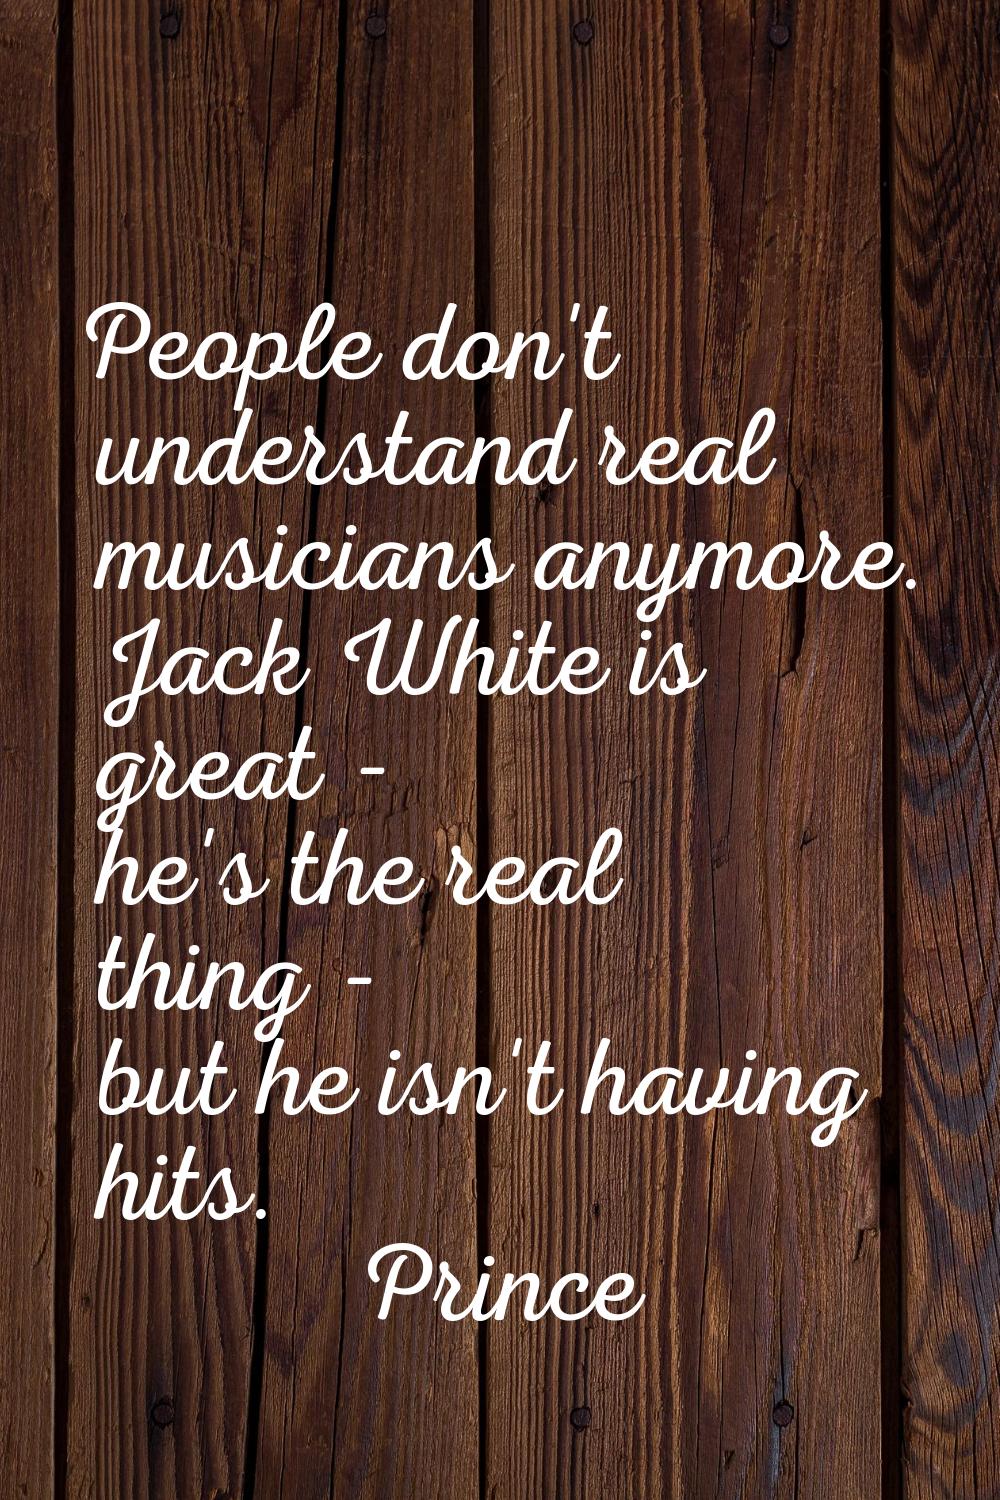 People don't understand real musicians anymore. Jack White is great - he's the real thing - but he 